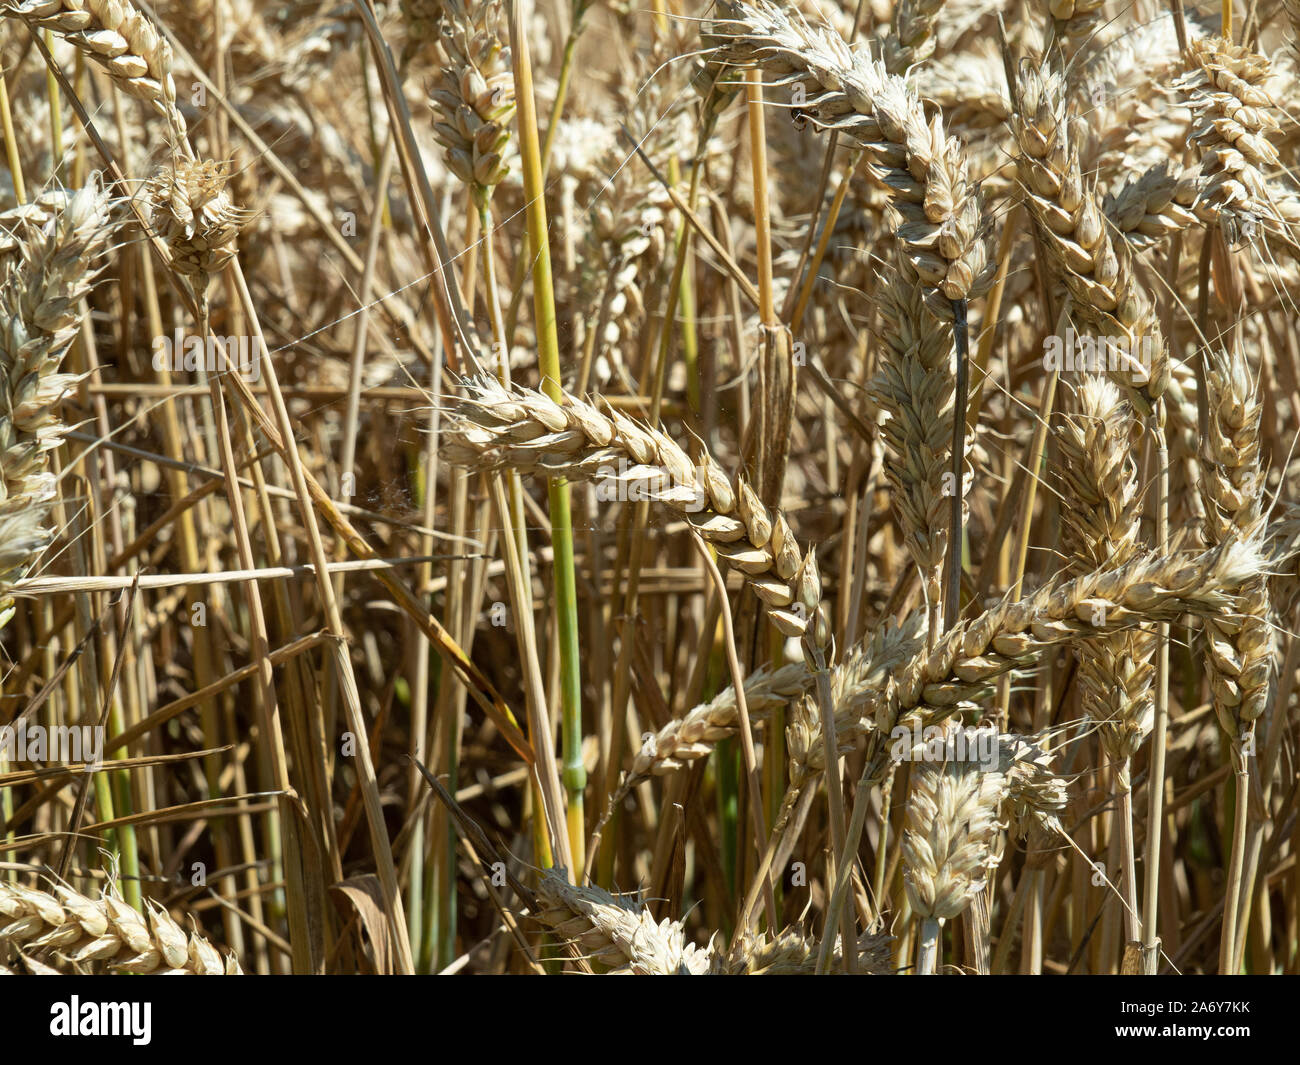 A close up of ears of wheat ready for harvest Stock Photo